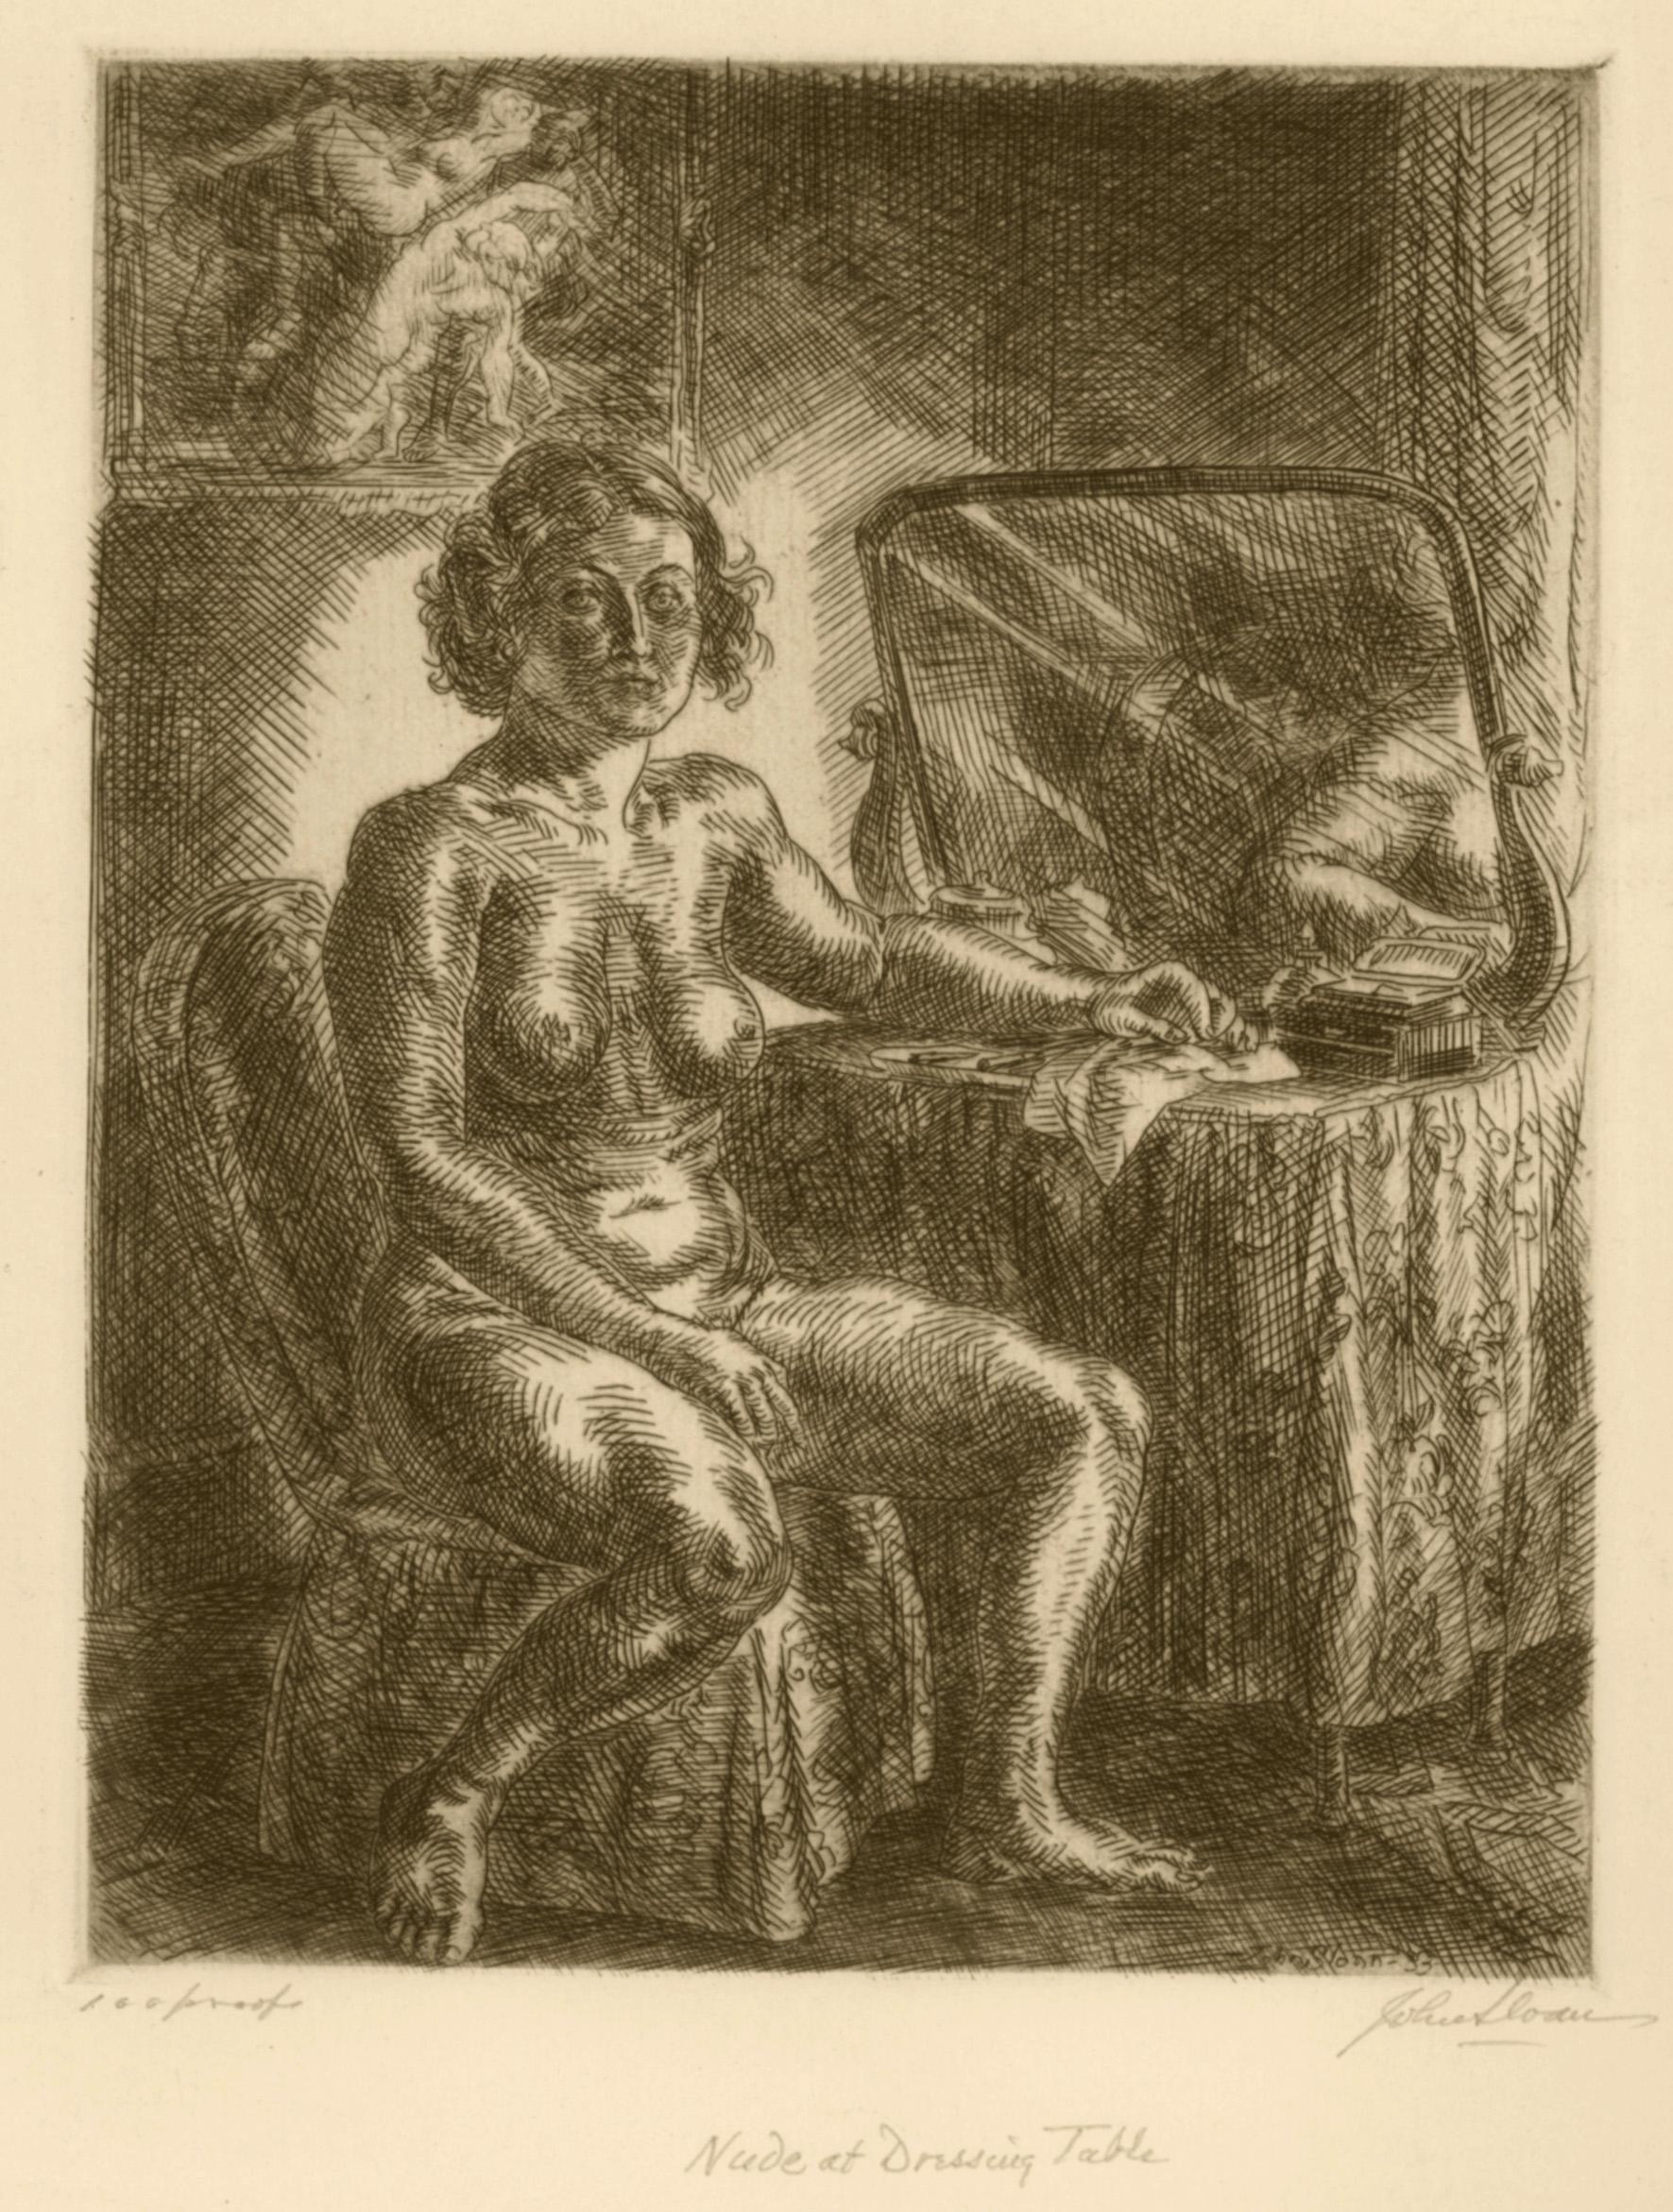 Nude at Dressing Table